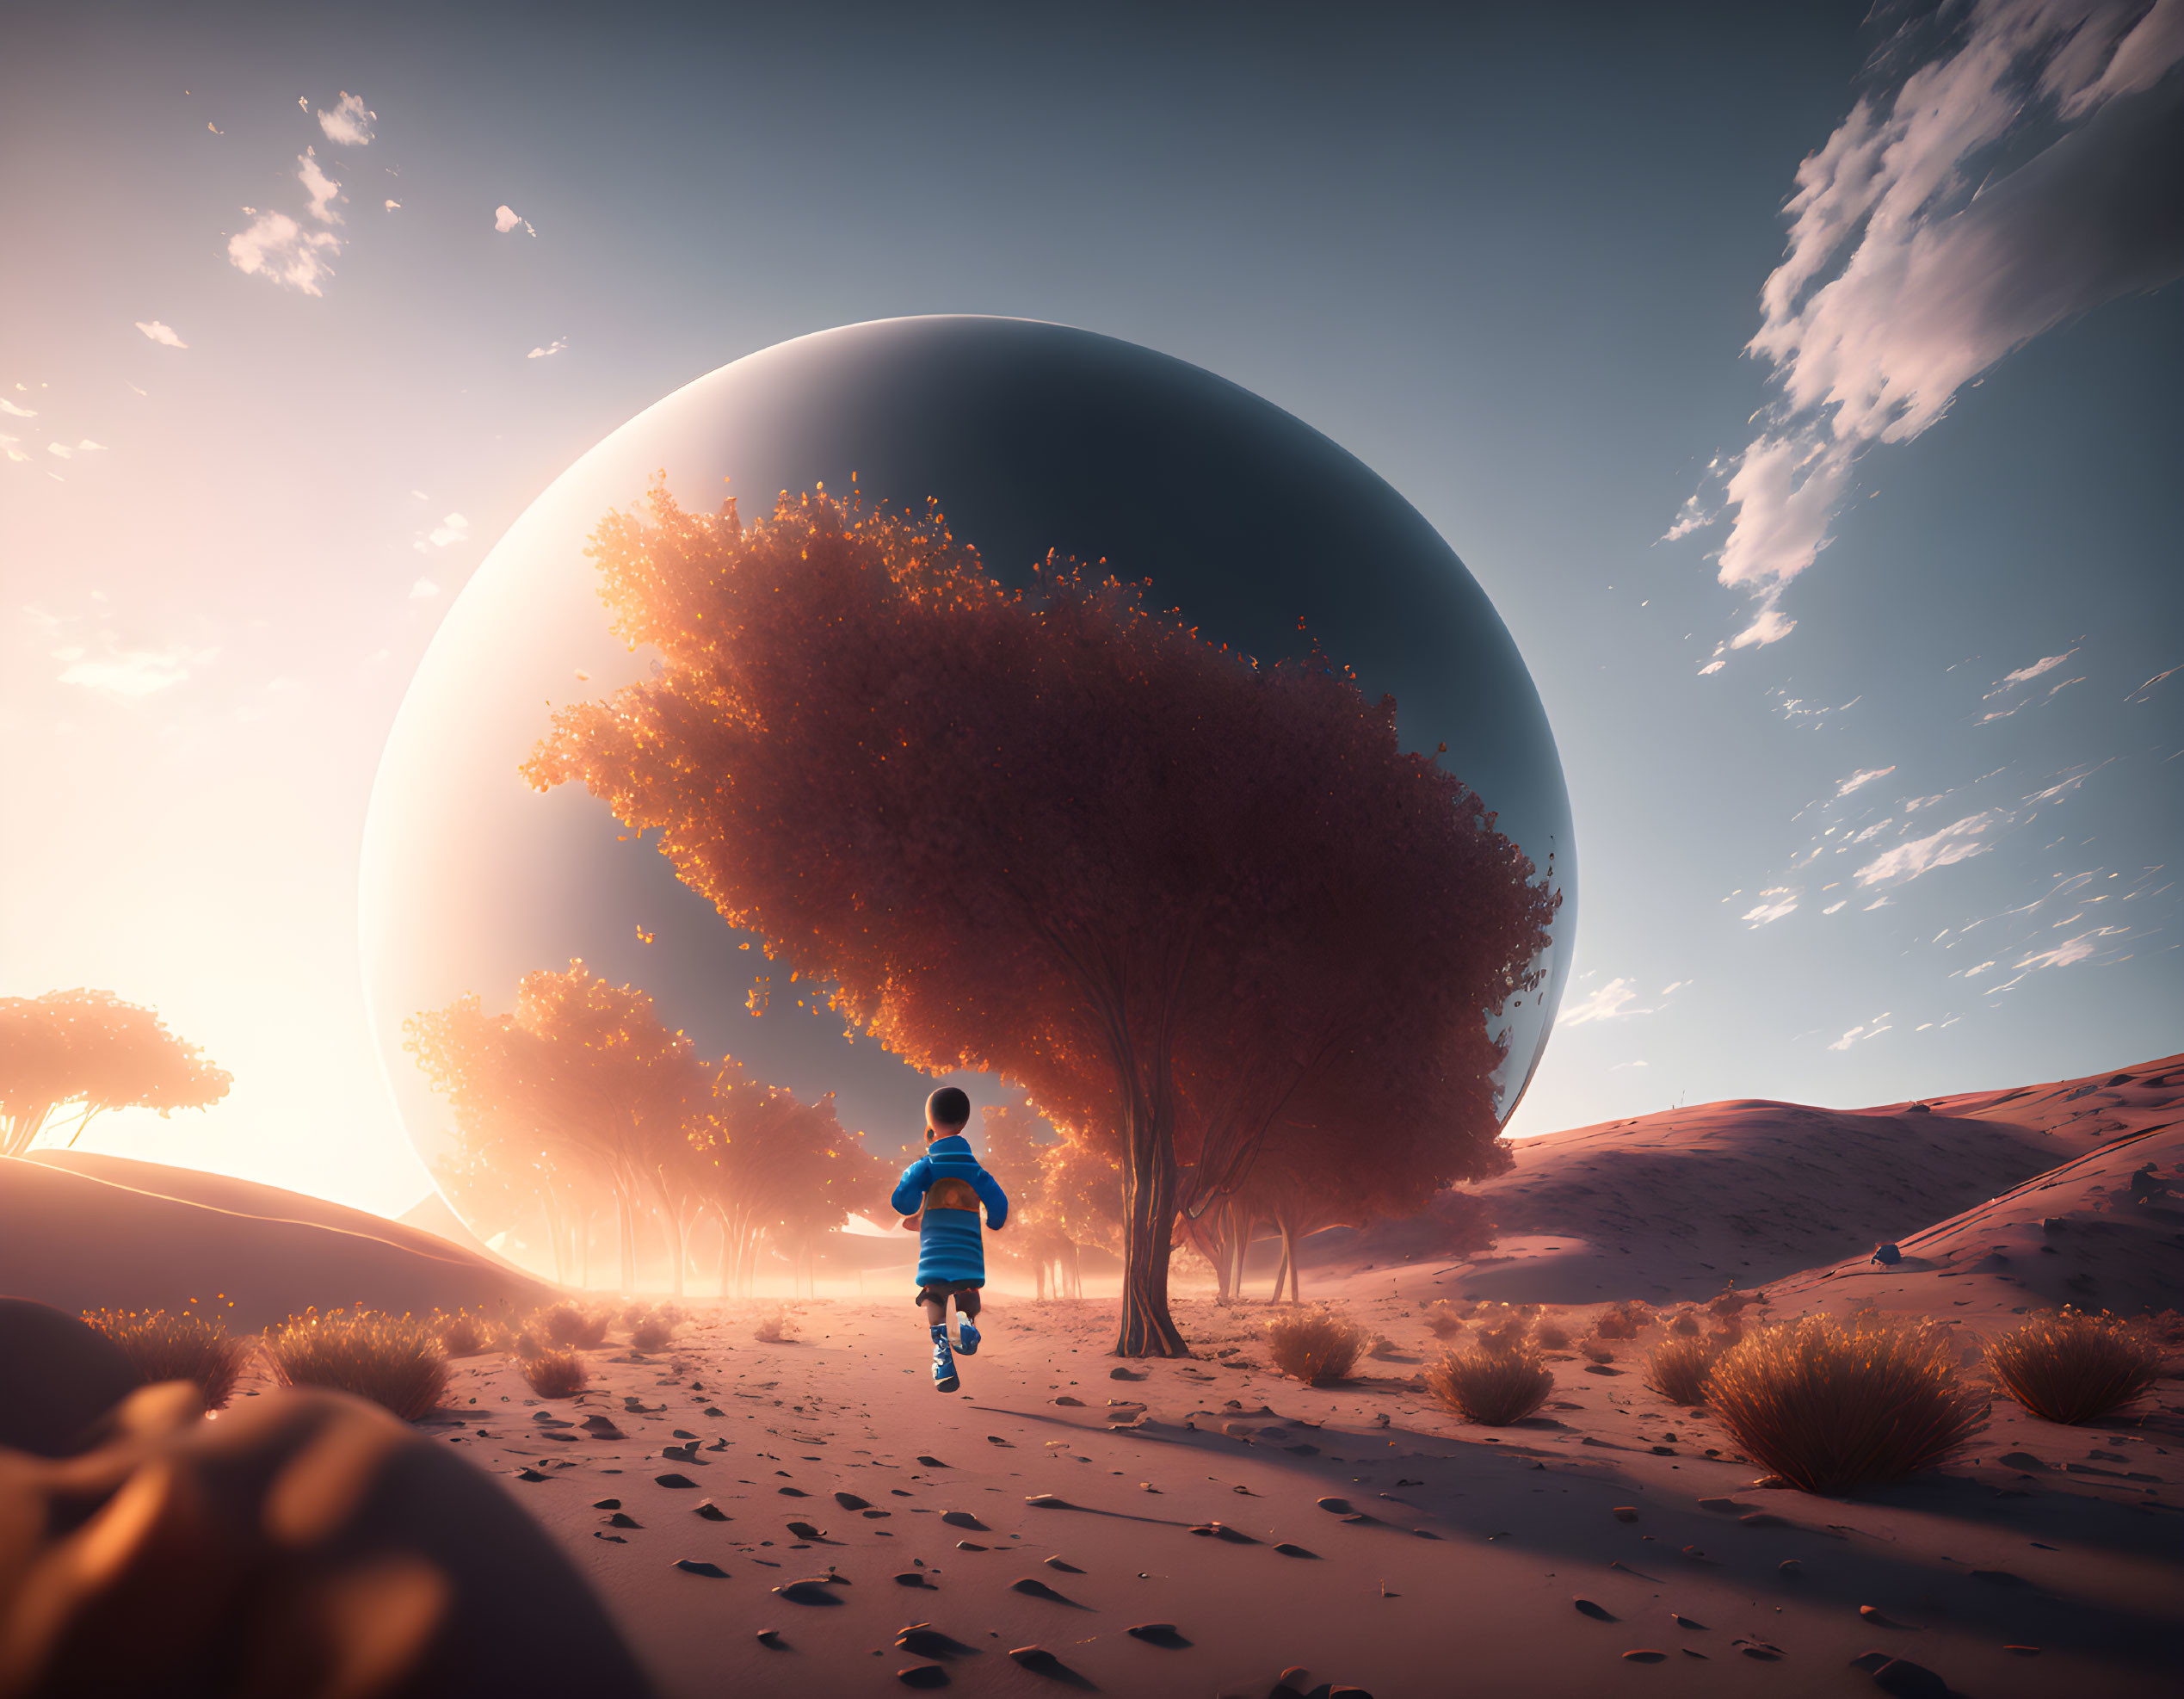 Child running to tree in desert with surreal planet in background